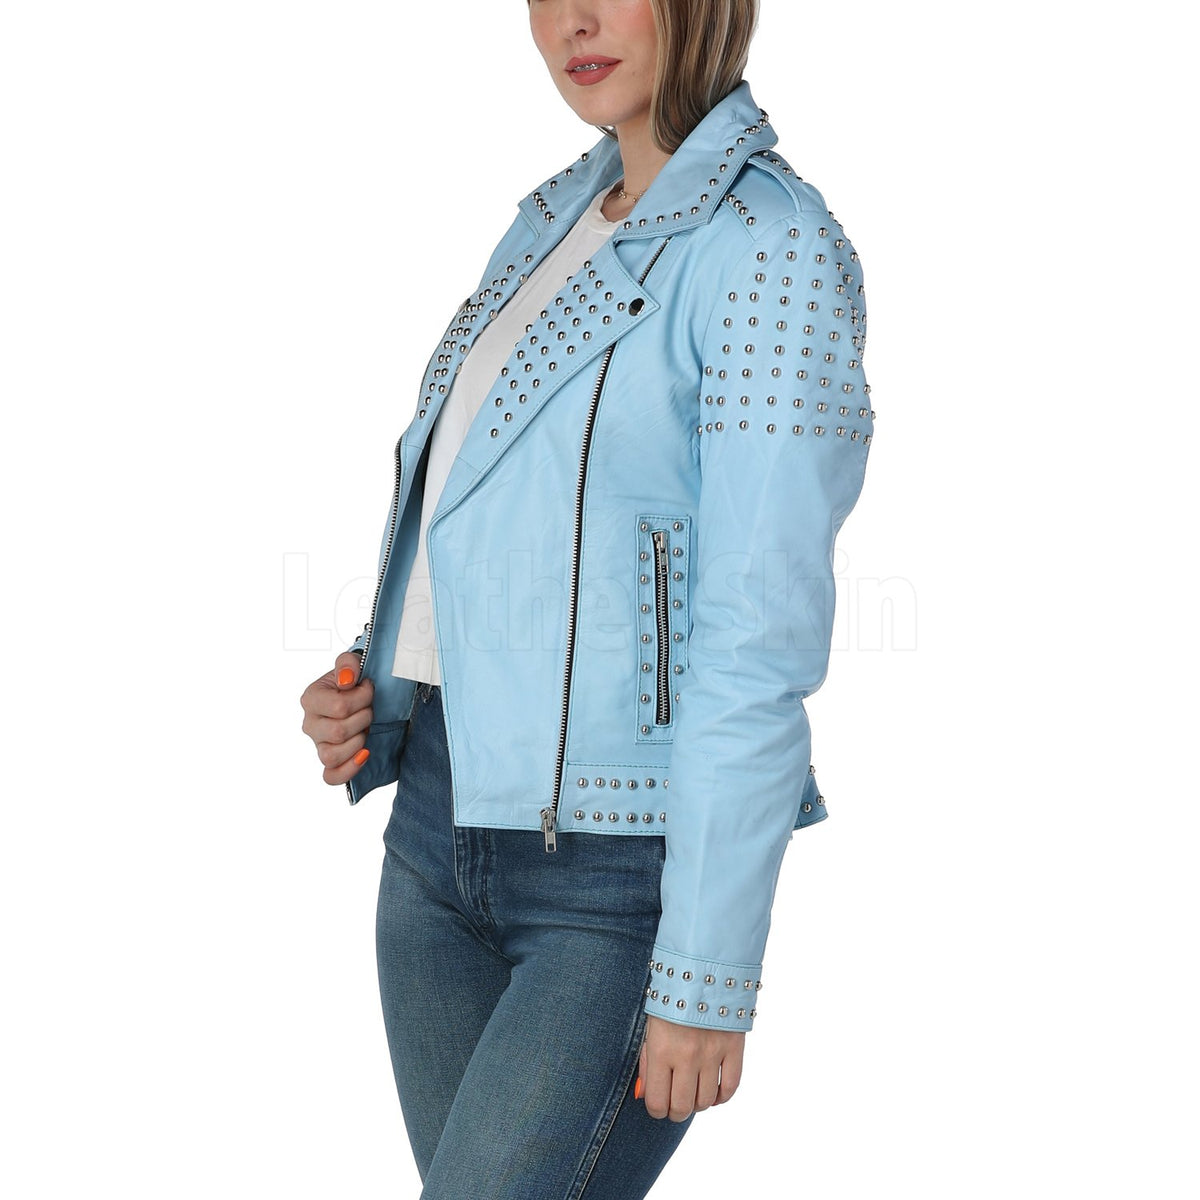 Skin Fashion Pure Genuine Leather Navy Blue Jacket for Women'